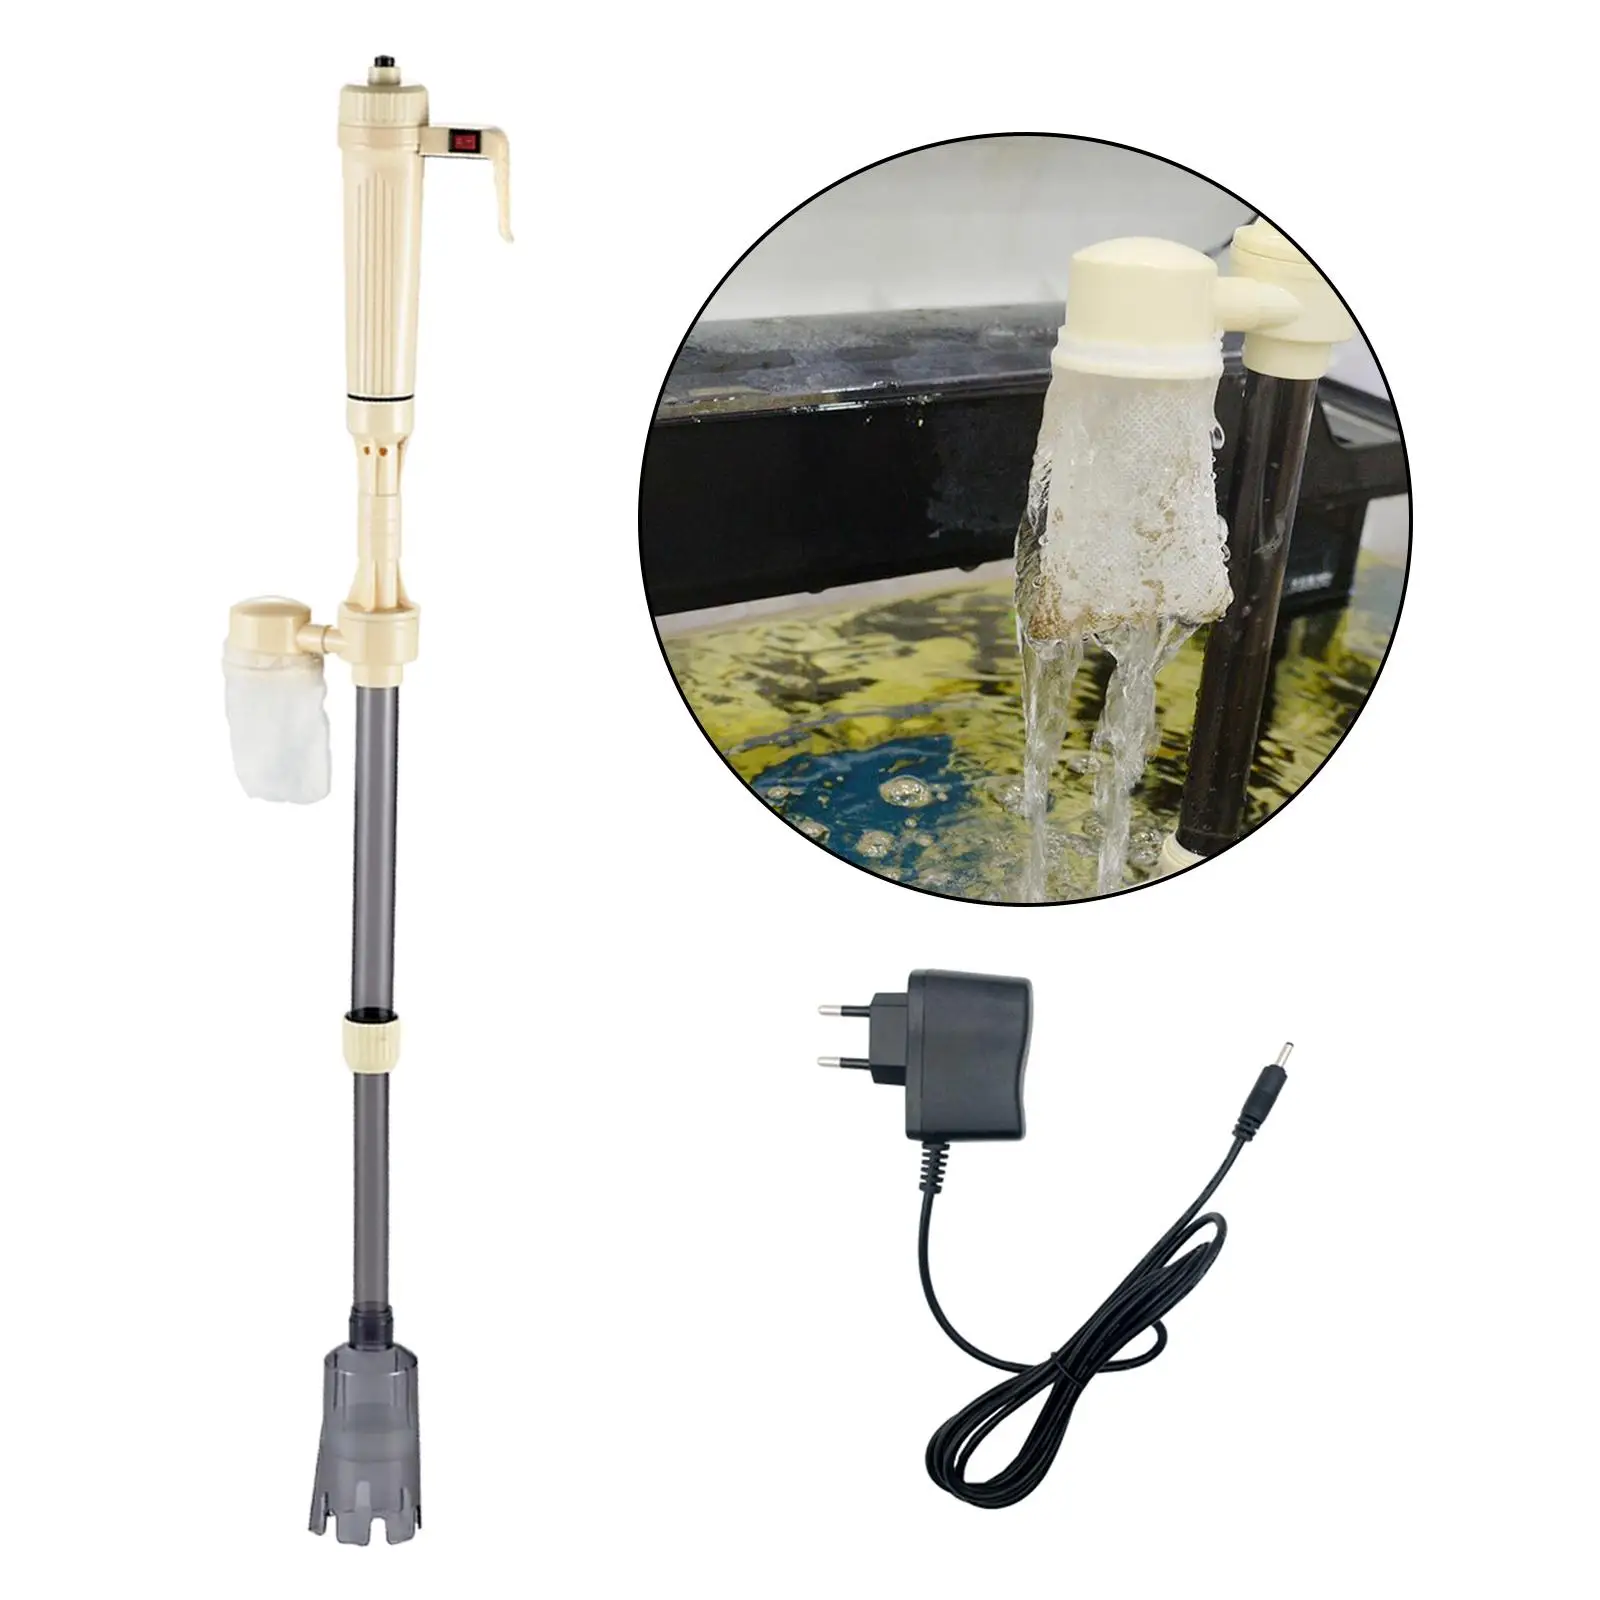 Electric Aquarium Siphon Vacuum Cleaner Machine Fish Tank Water Change Water Filter Pump Sand Washer Cleaning Tool